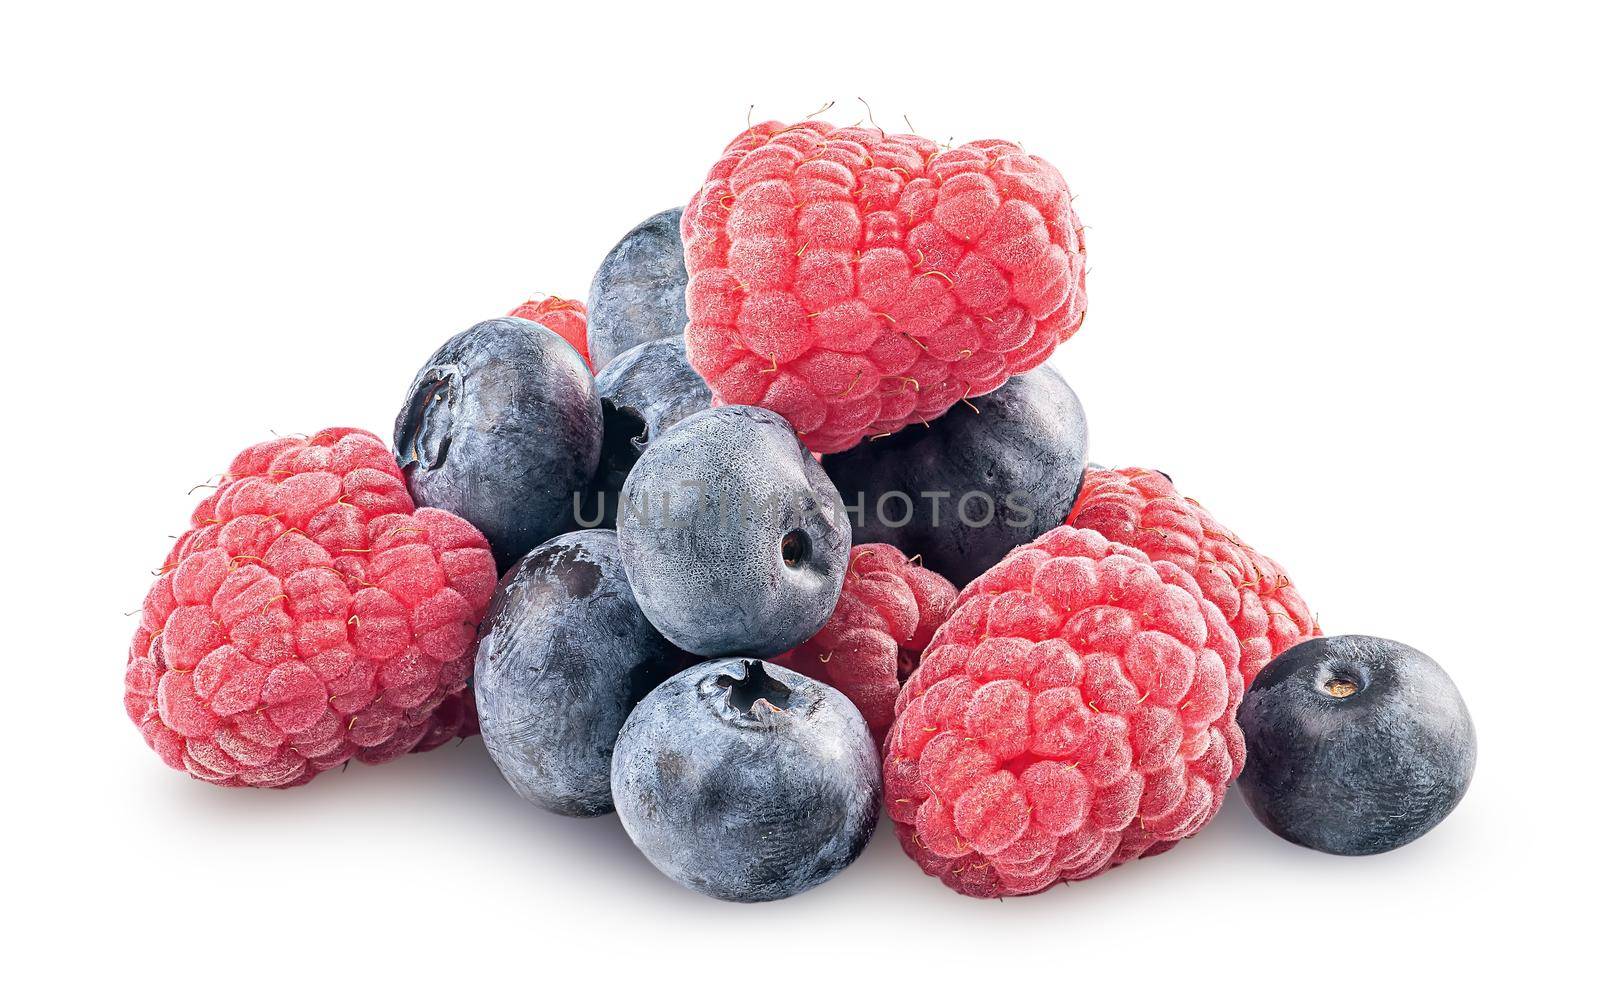 Heap of raspberries and blueberries isolated on white background